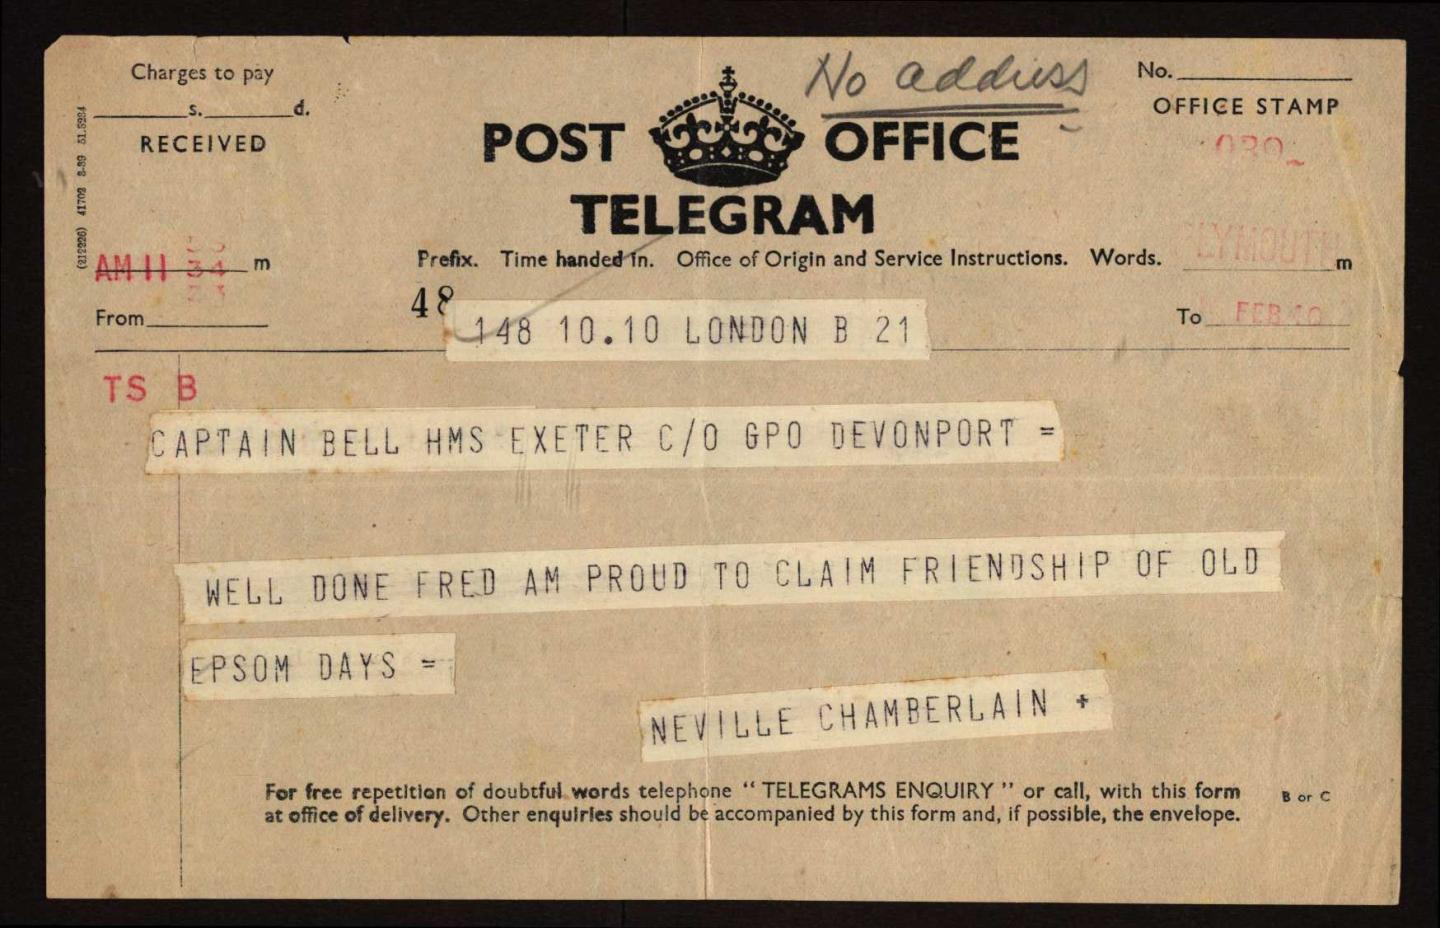 Telegram from then Prime Minister Neville Chamberlain congratulating Bell on his success at the River Plate